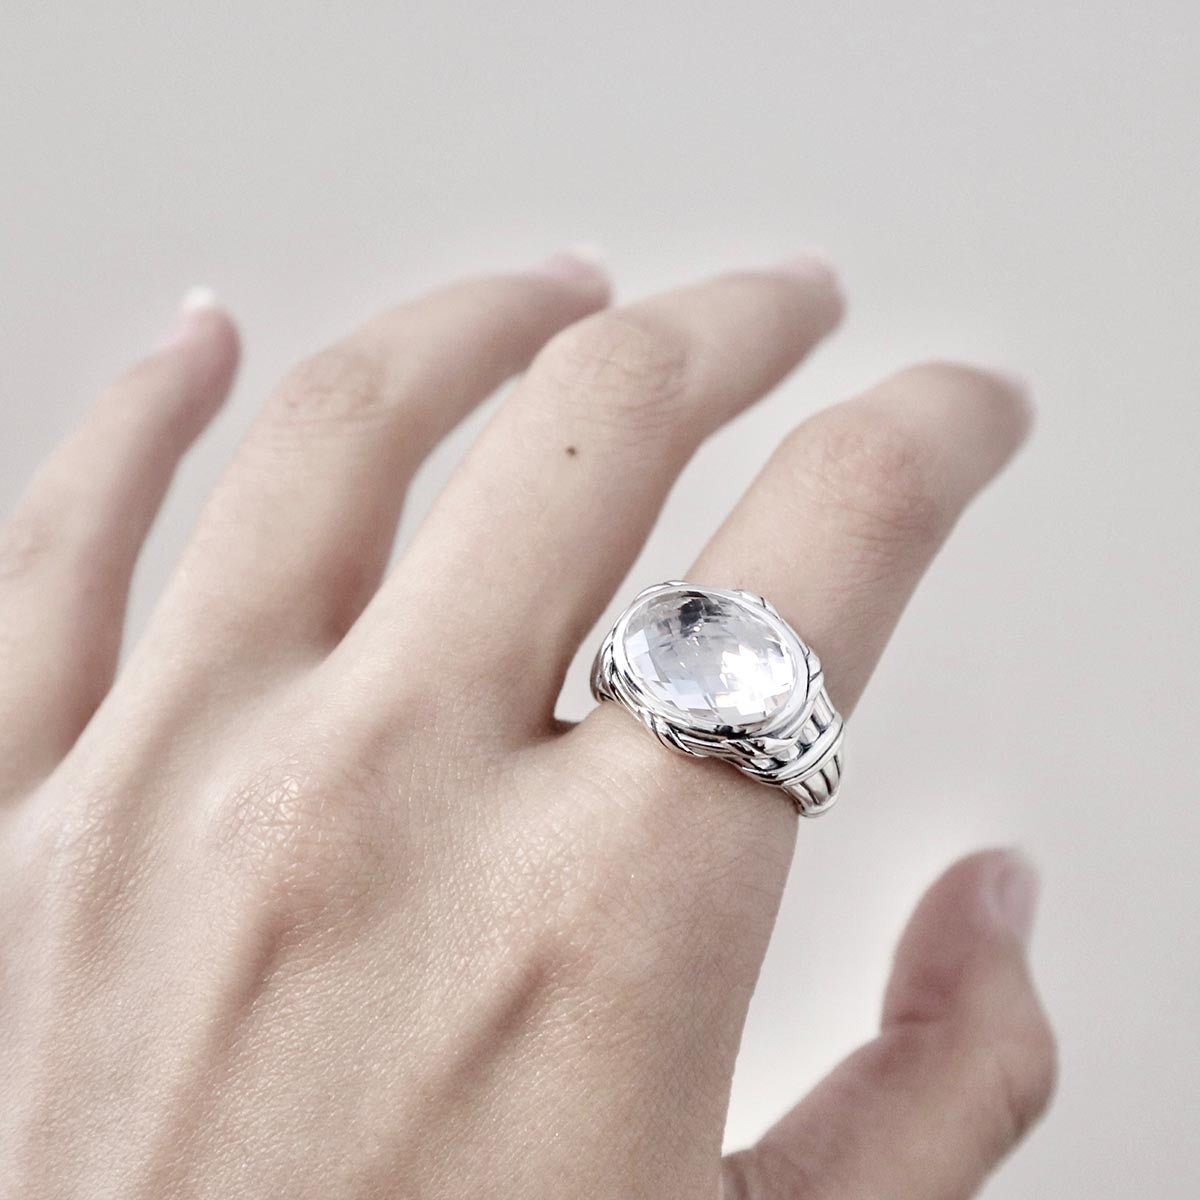 Reflections Statement Ring in sterling silver with rock crystal